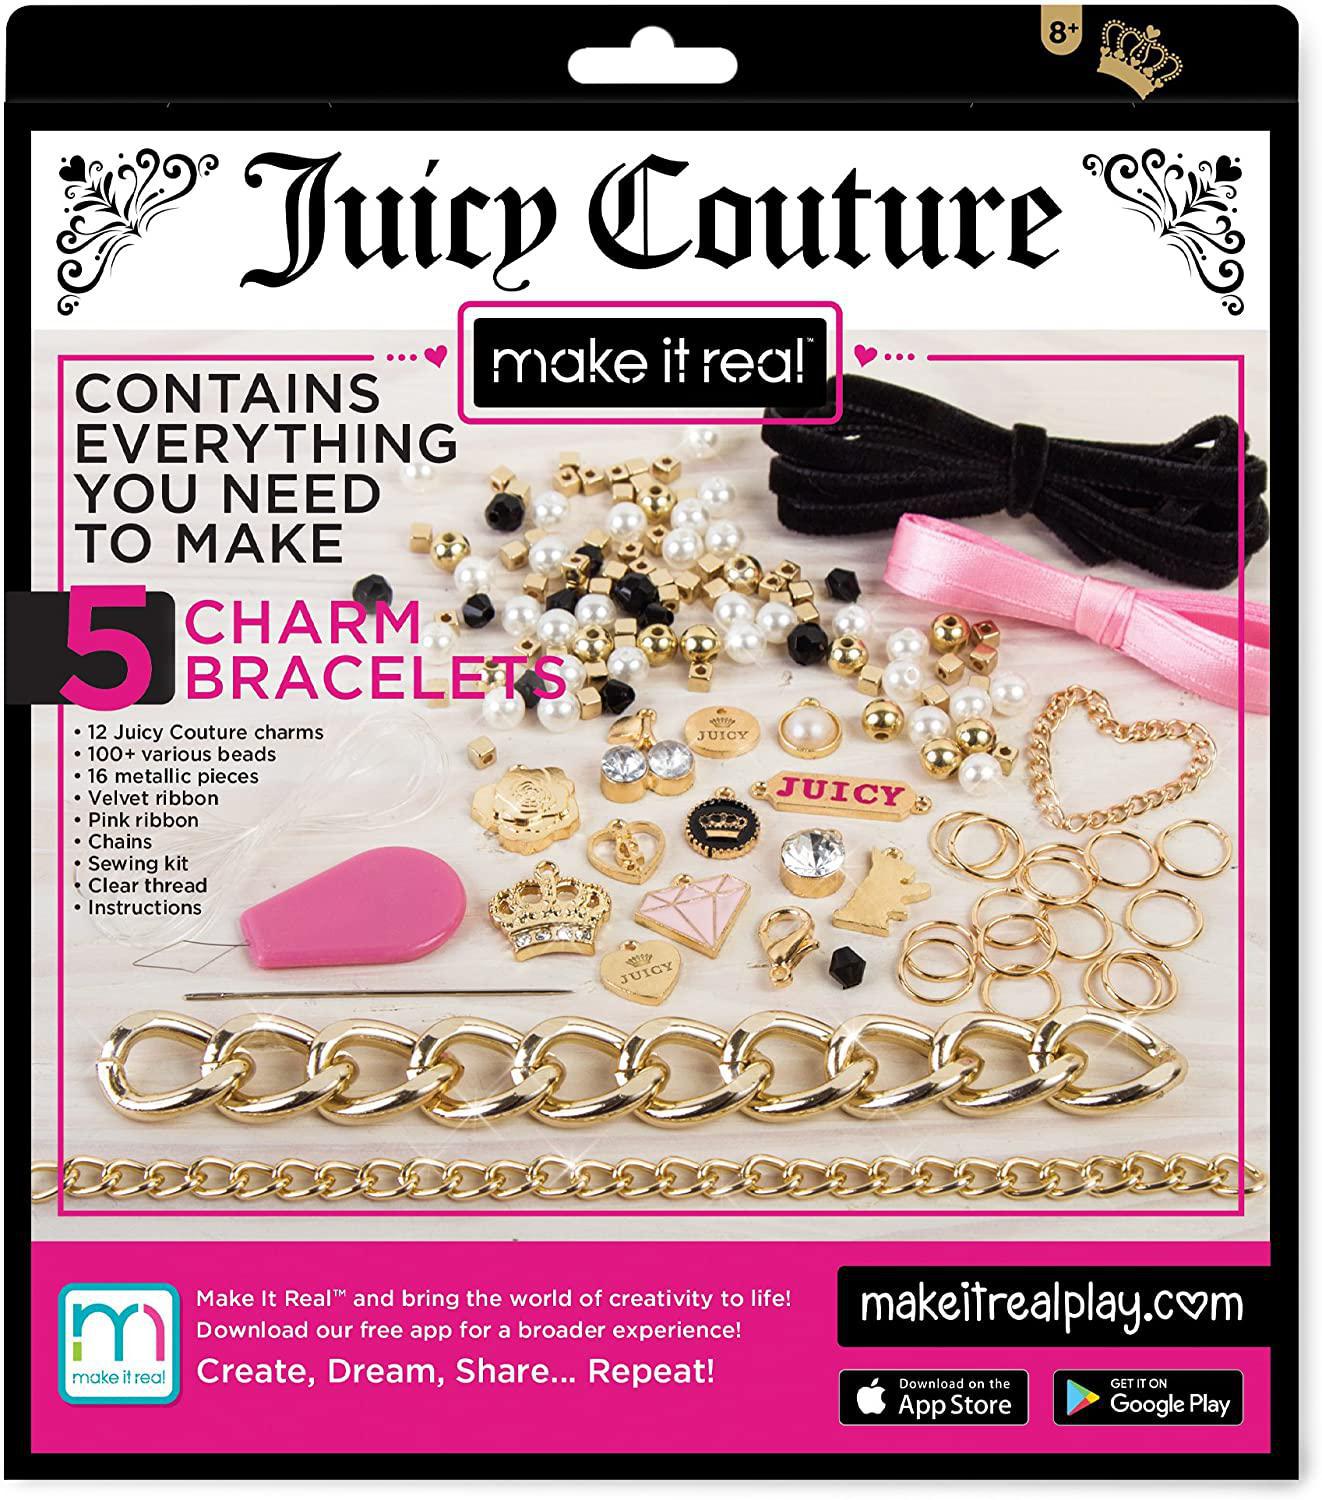 Make It Real - Juicy Couture Chains and Charms - DIY Charm Bracelet Making Kit for Girls - Feature Beads, Velvet Ribbon, Gold Chains